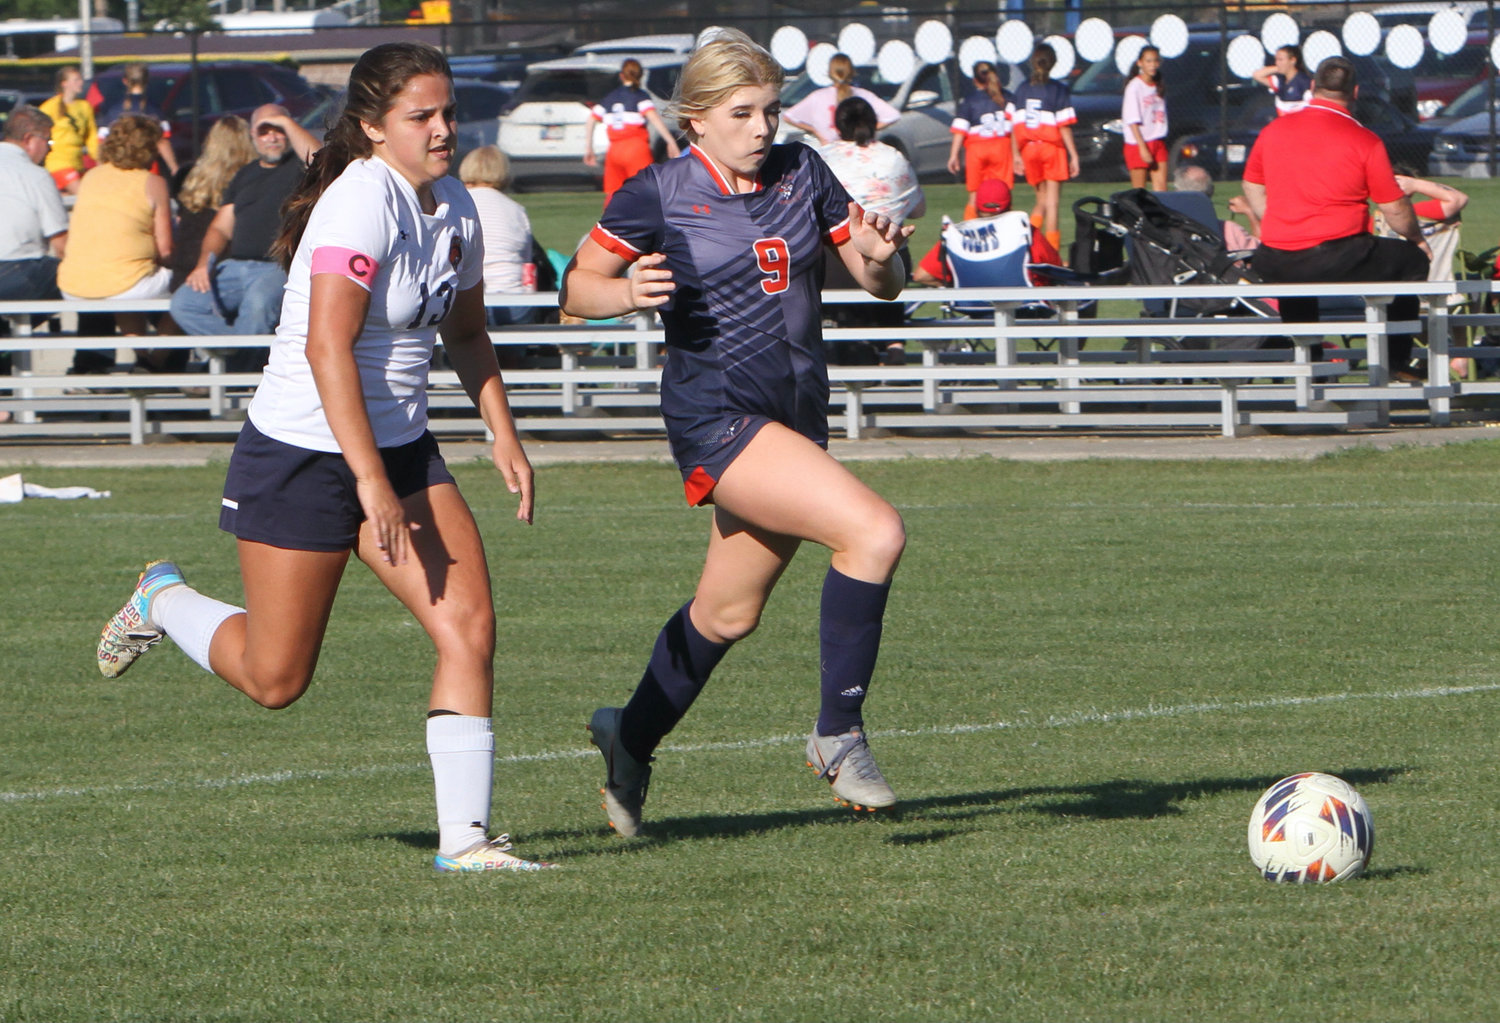 Marissa Moffit fights for possession for the Chargers.